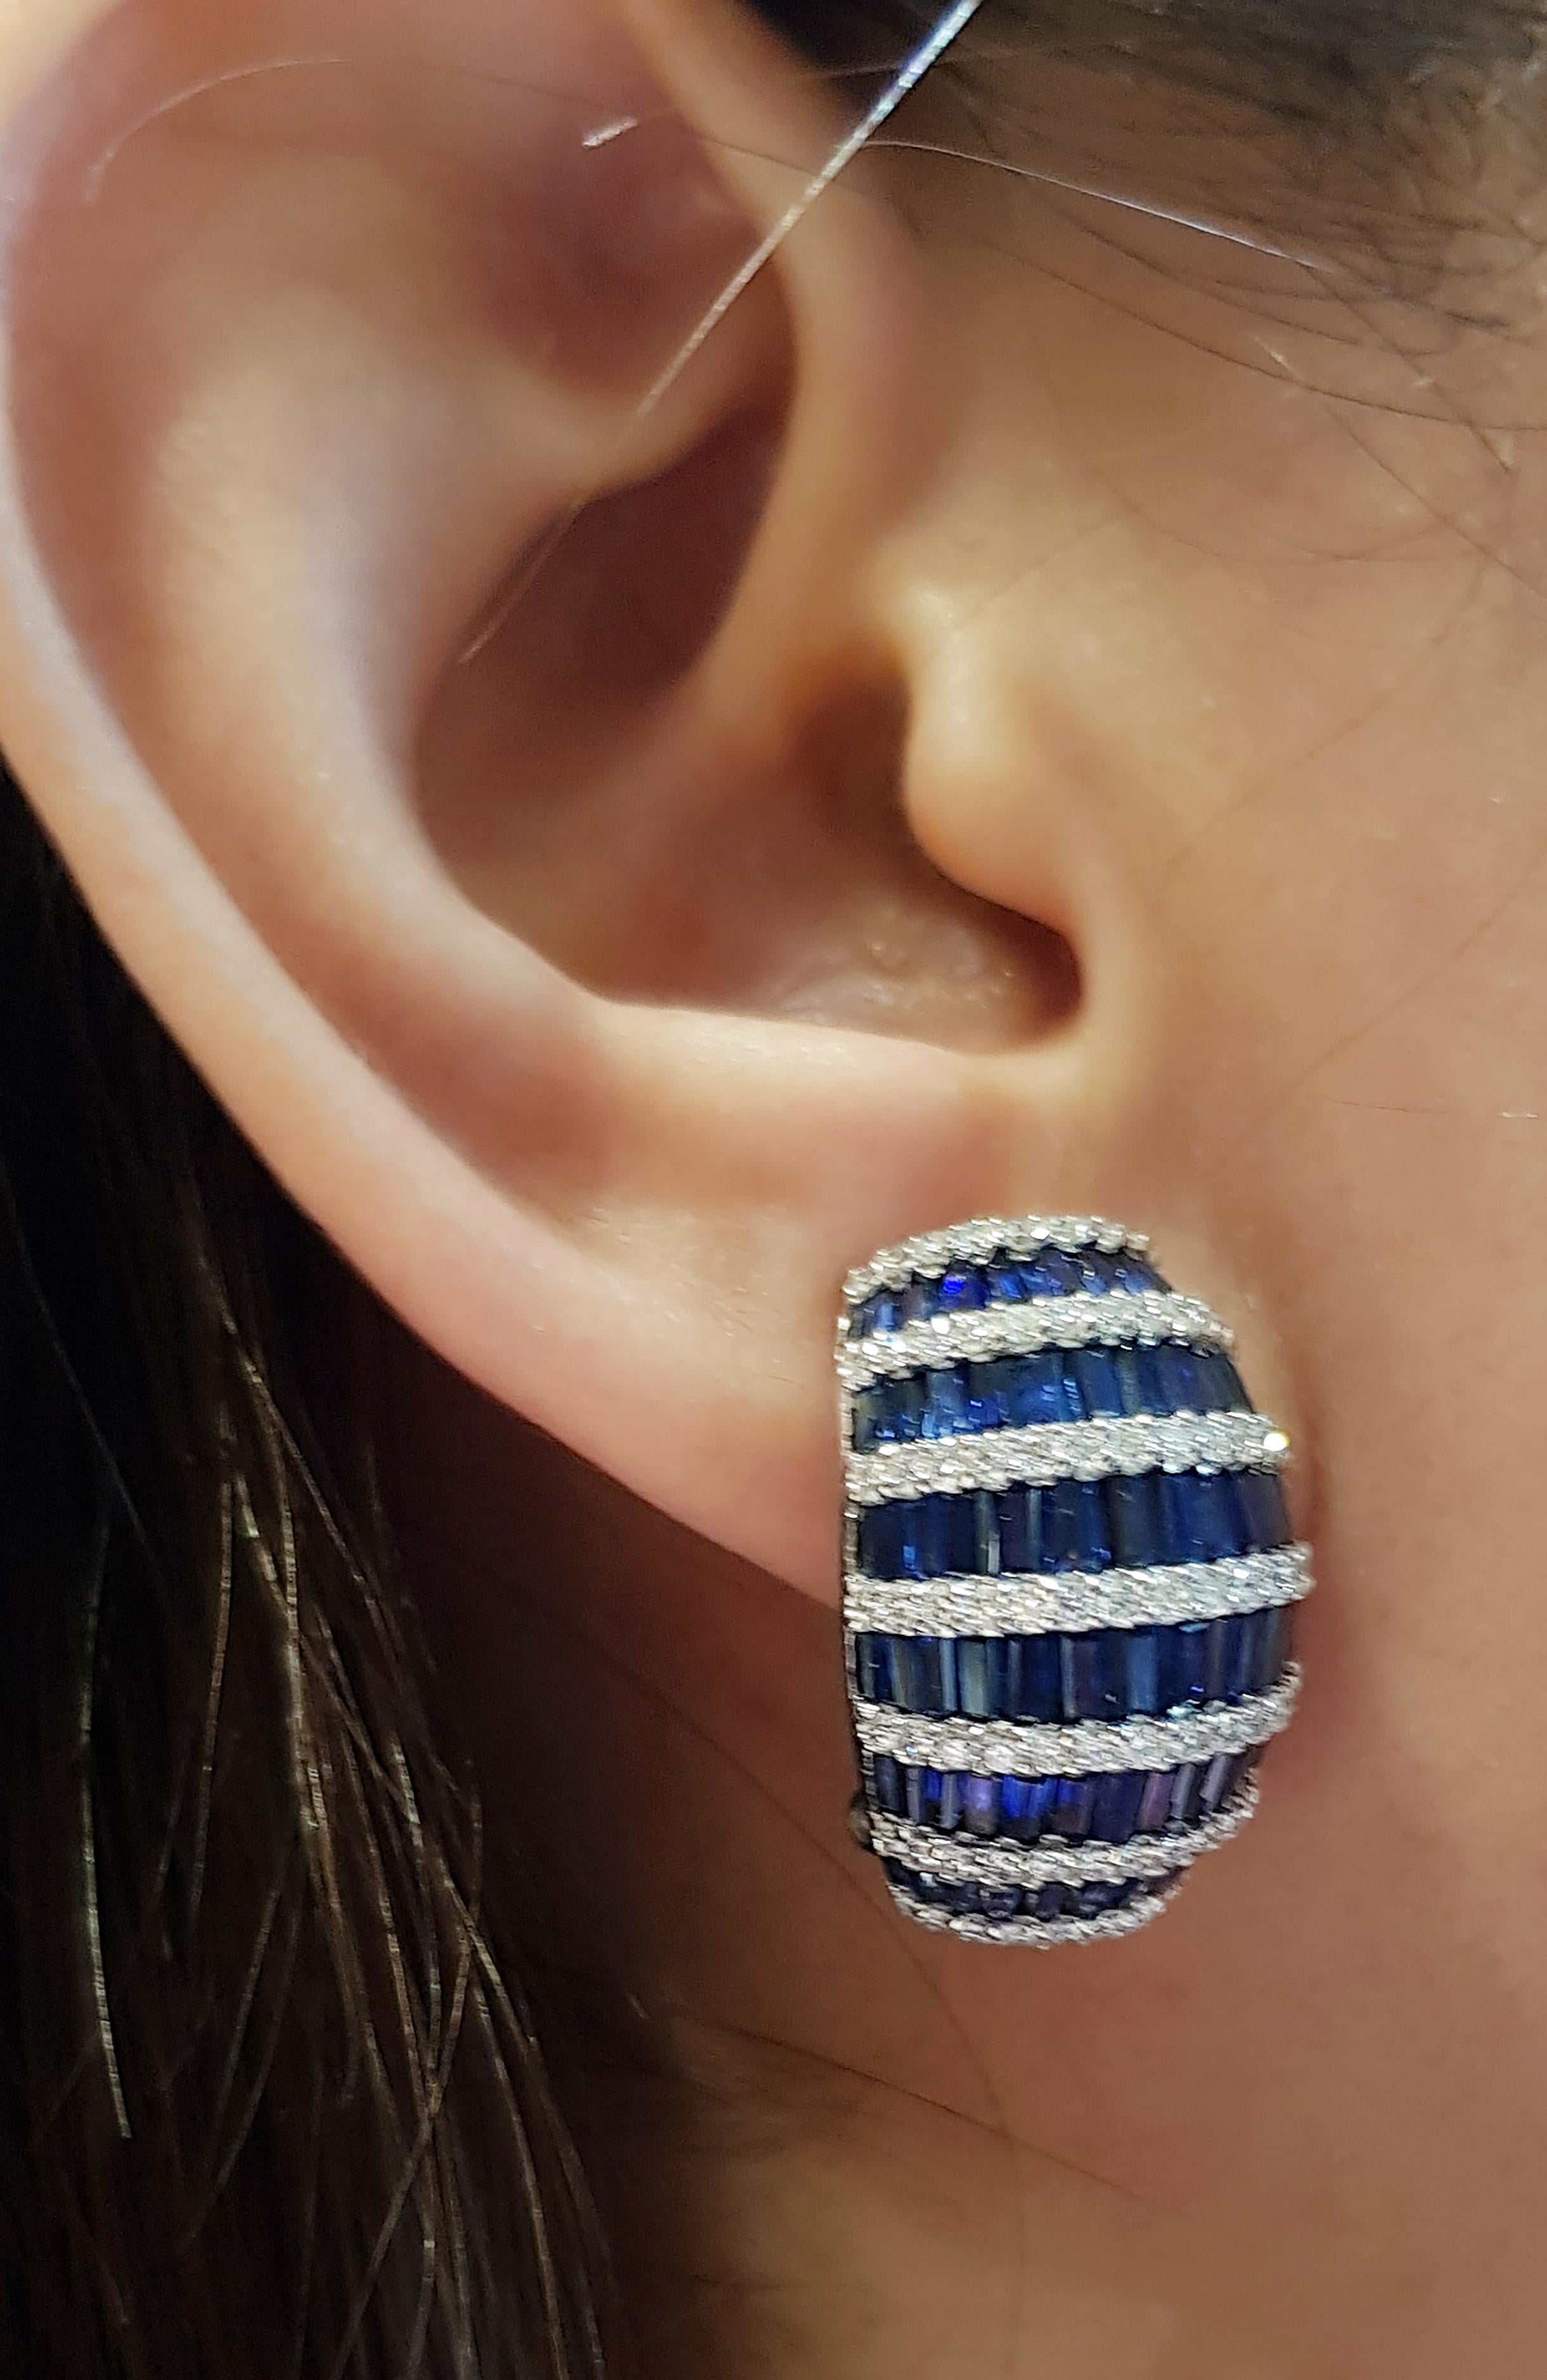 Blue Sapphire 13.60 carats with Diamond 1.50  carats Earrings set in 18 Karat White Gold Settings

Width:  1.4 cm 
Length: 2.0 cm
Total Weight: 14.72 grams

